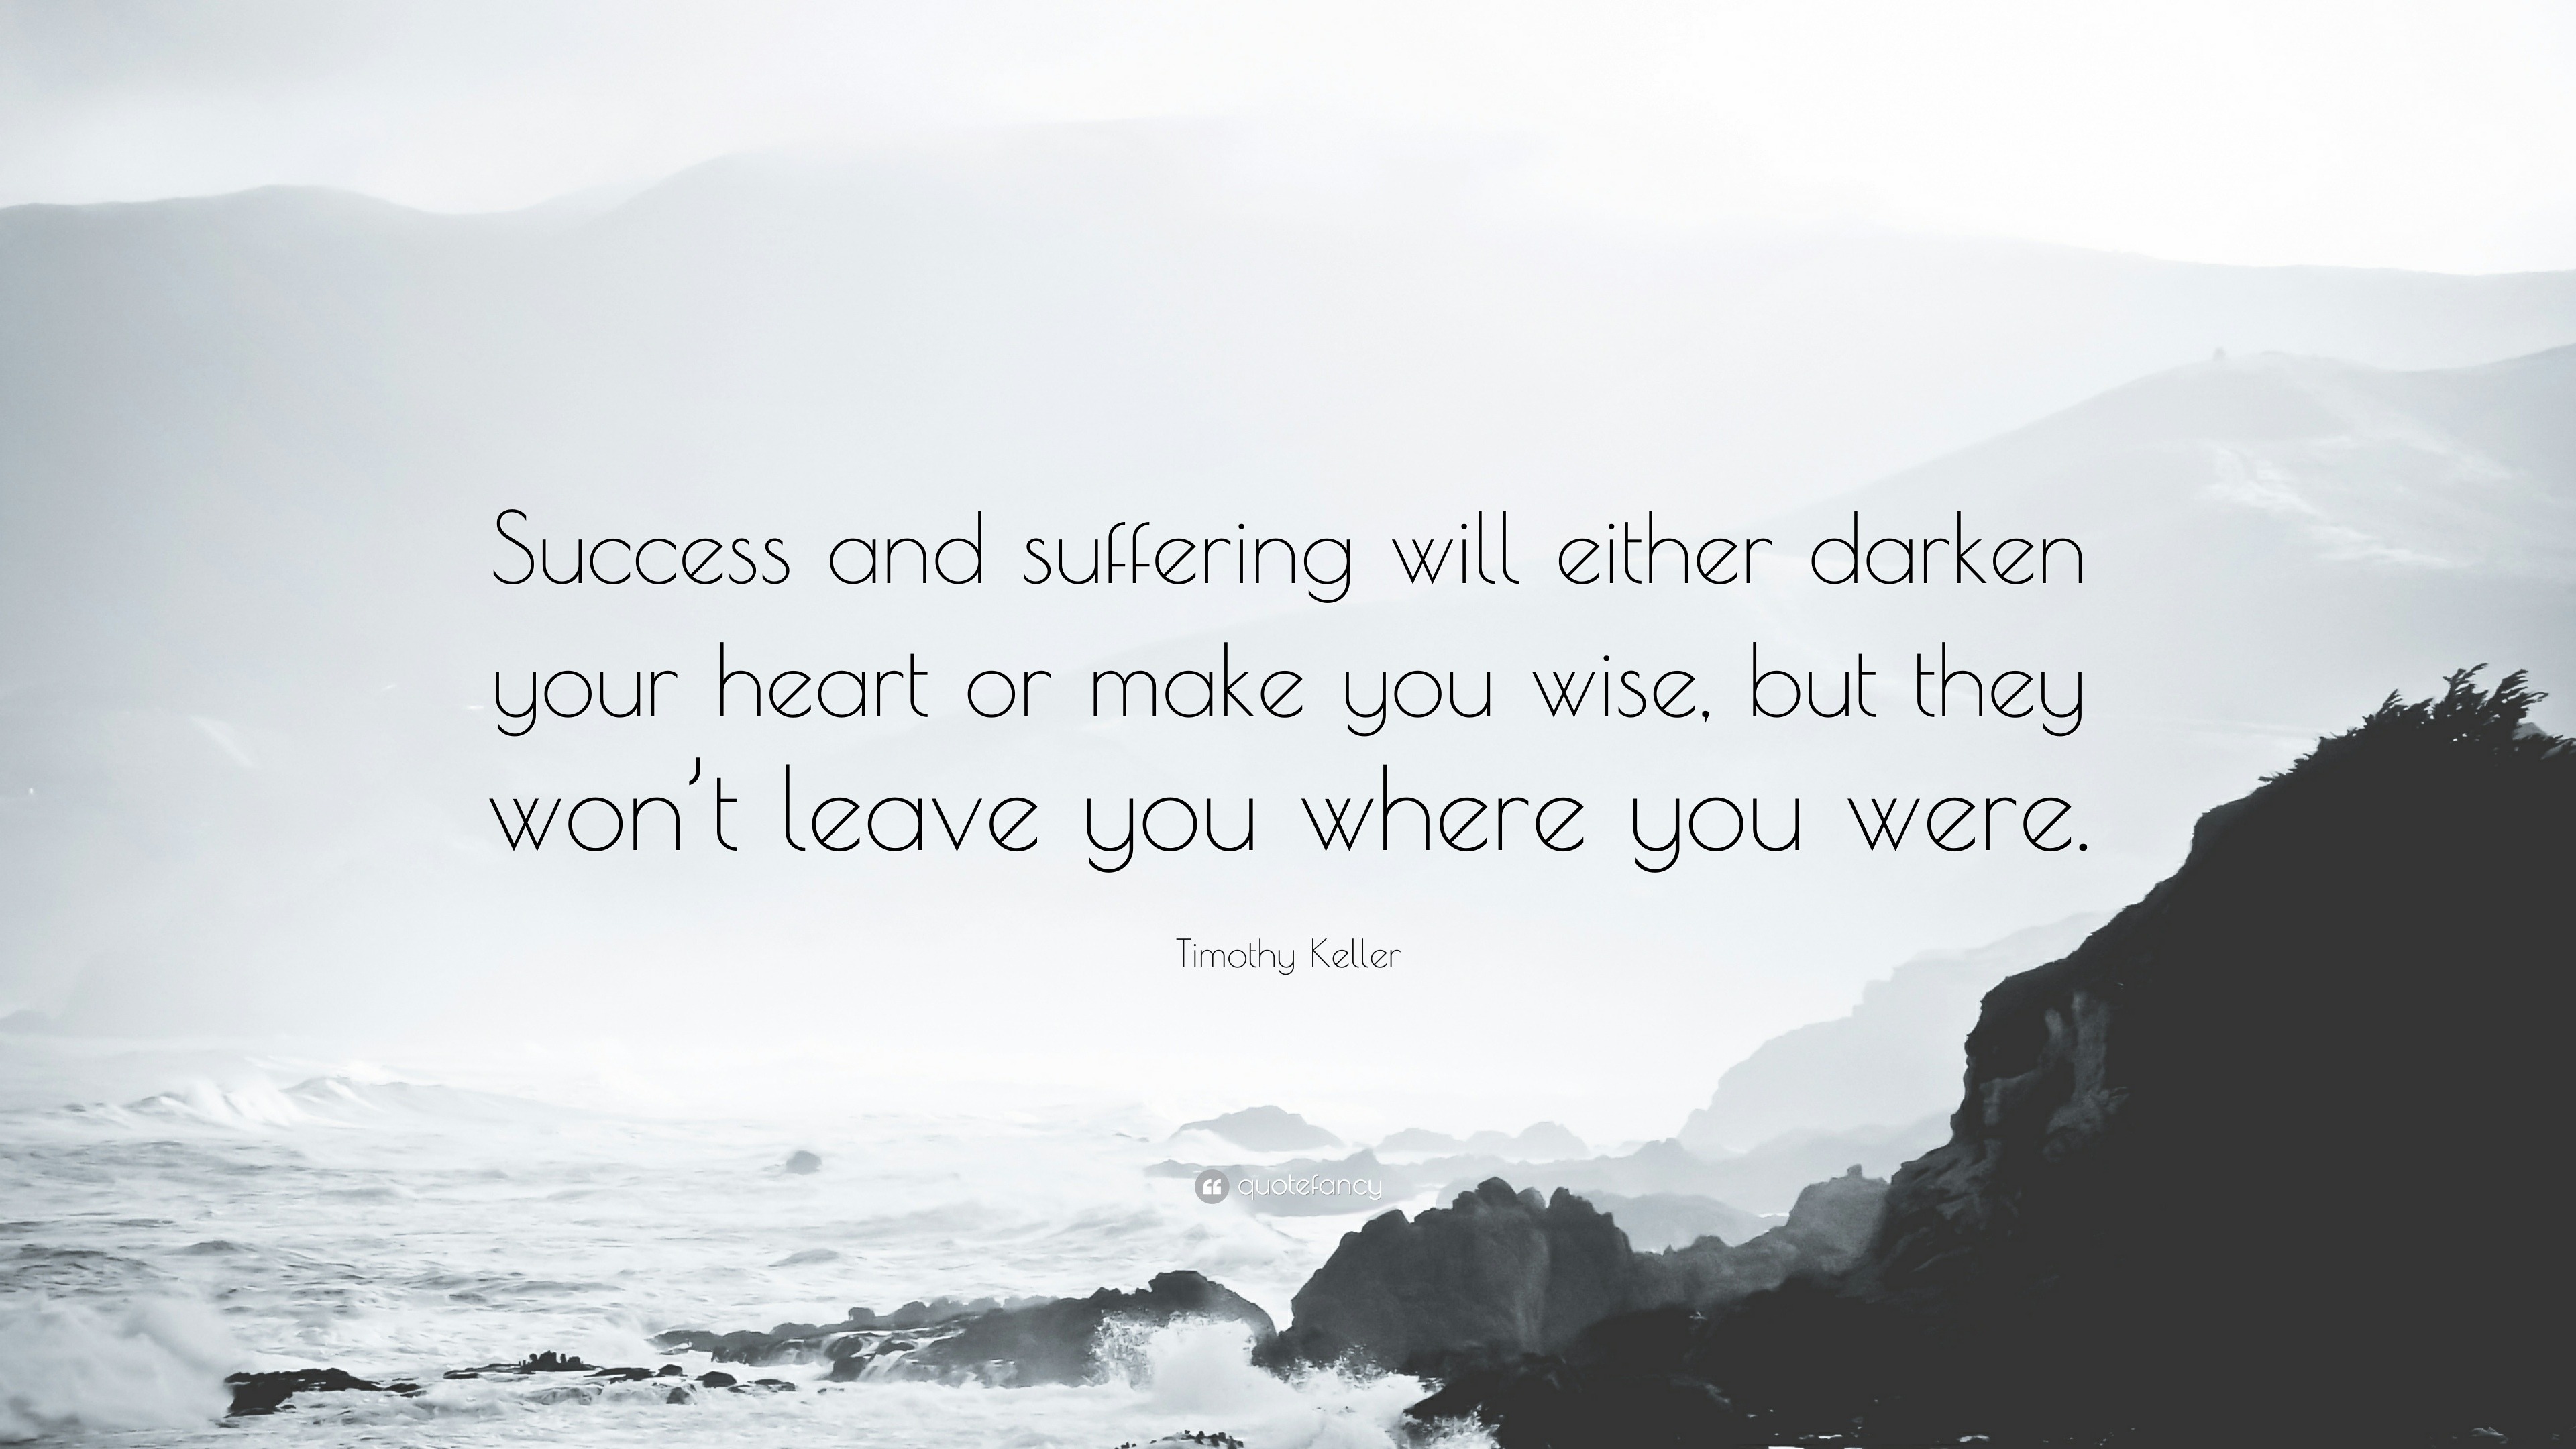 432724-Timothy-Keller-Quote-Success-and-suffering-will-either-darken-your.jpg